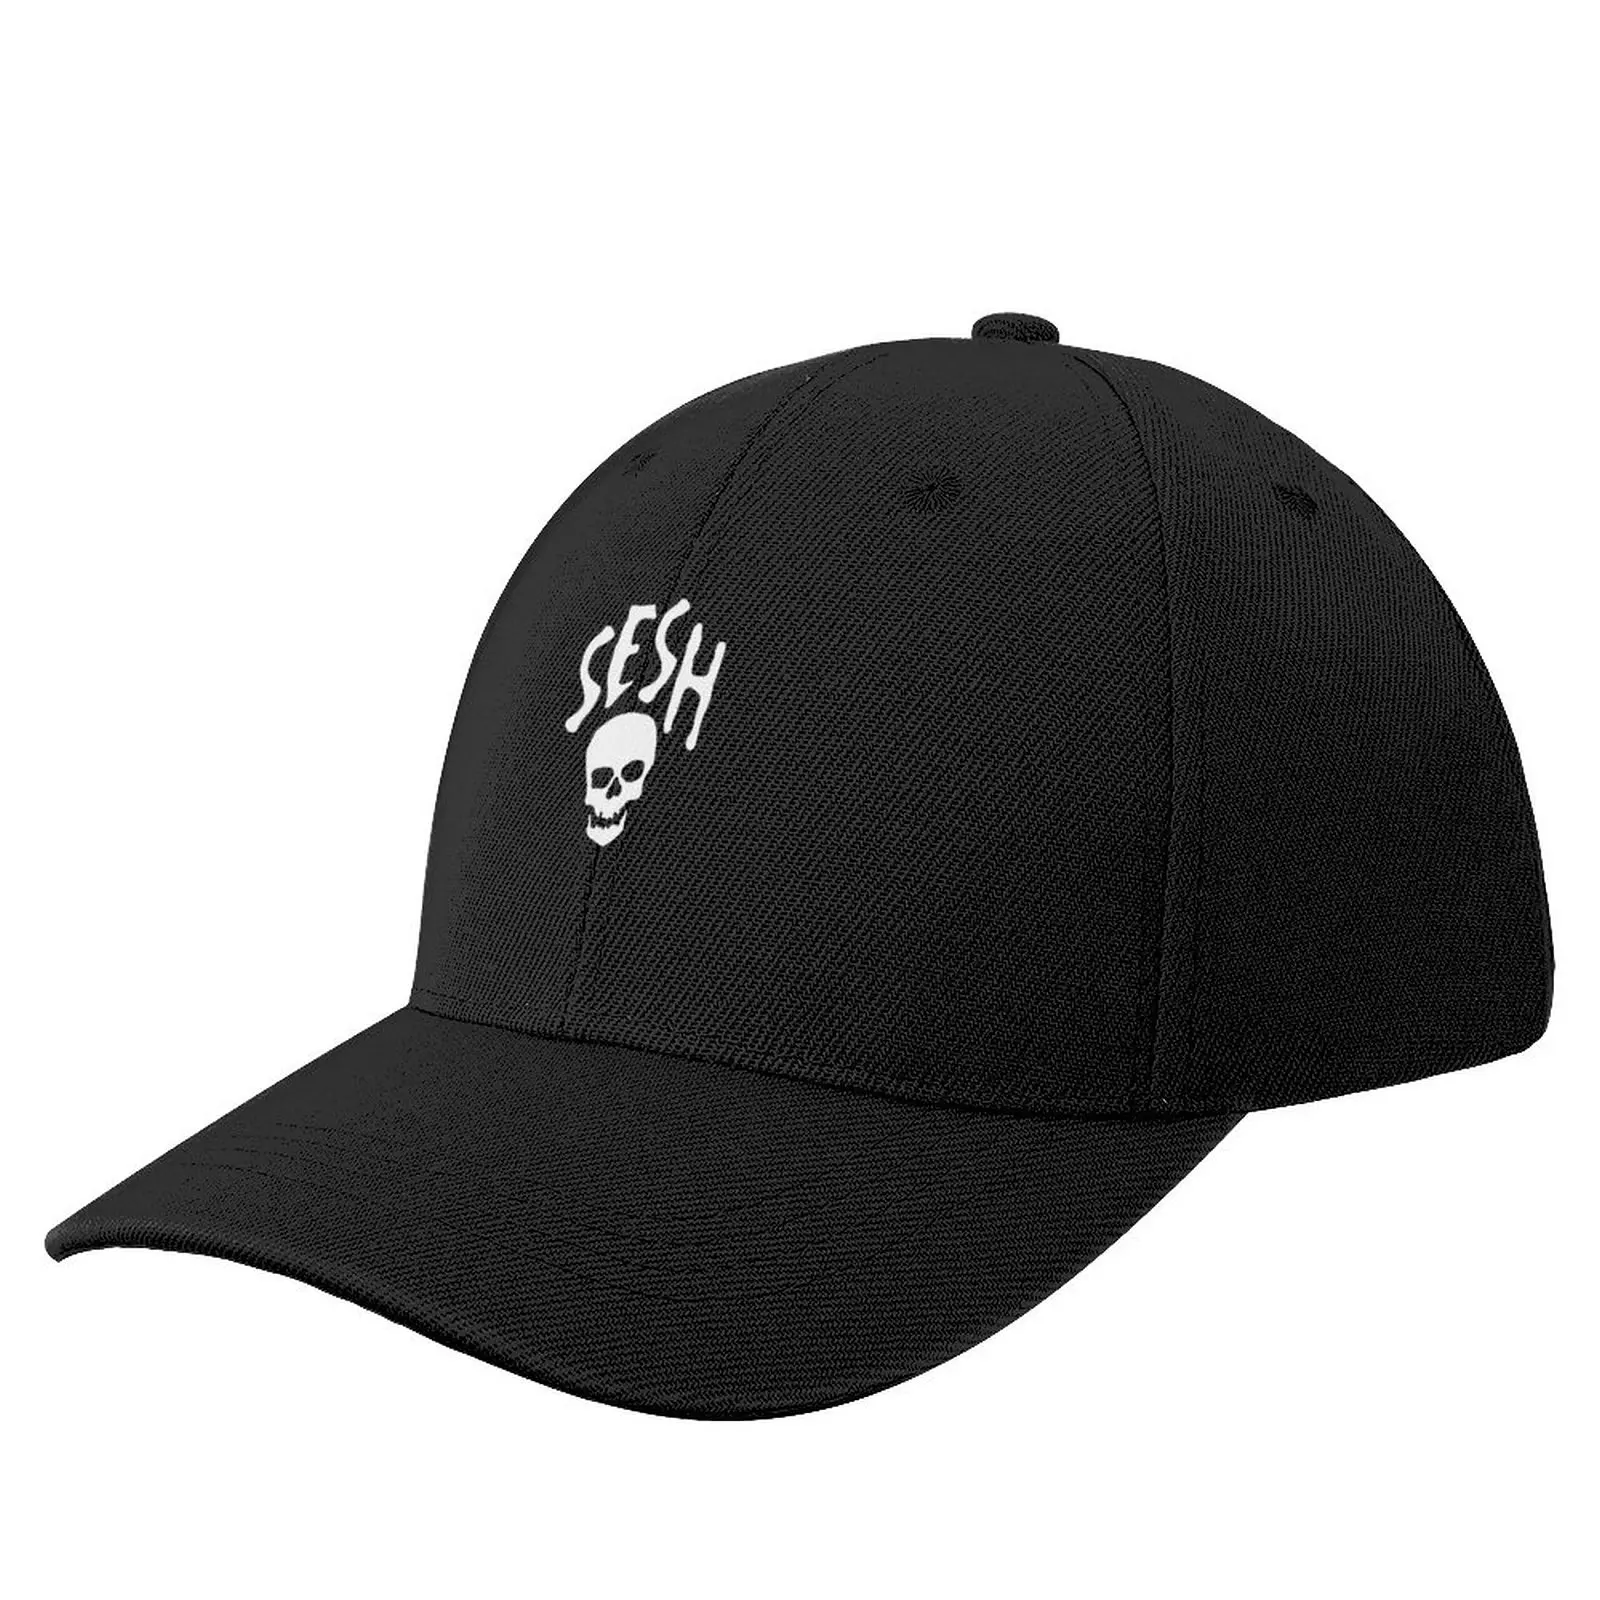 Patch Skull Sesh Essential Baseball Cap Rugby derby hat Military Tactical Cap Men Hat Women's